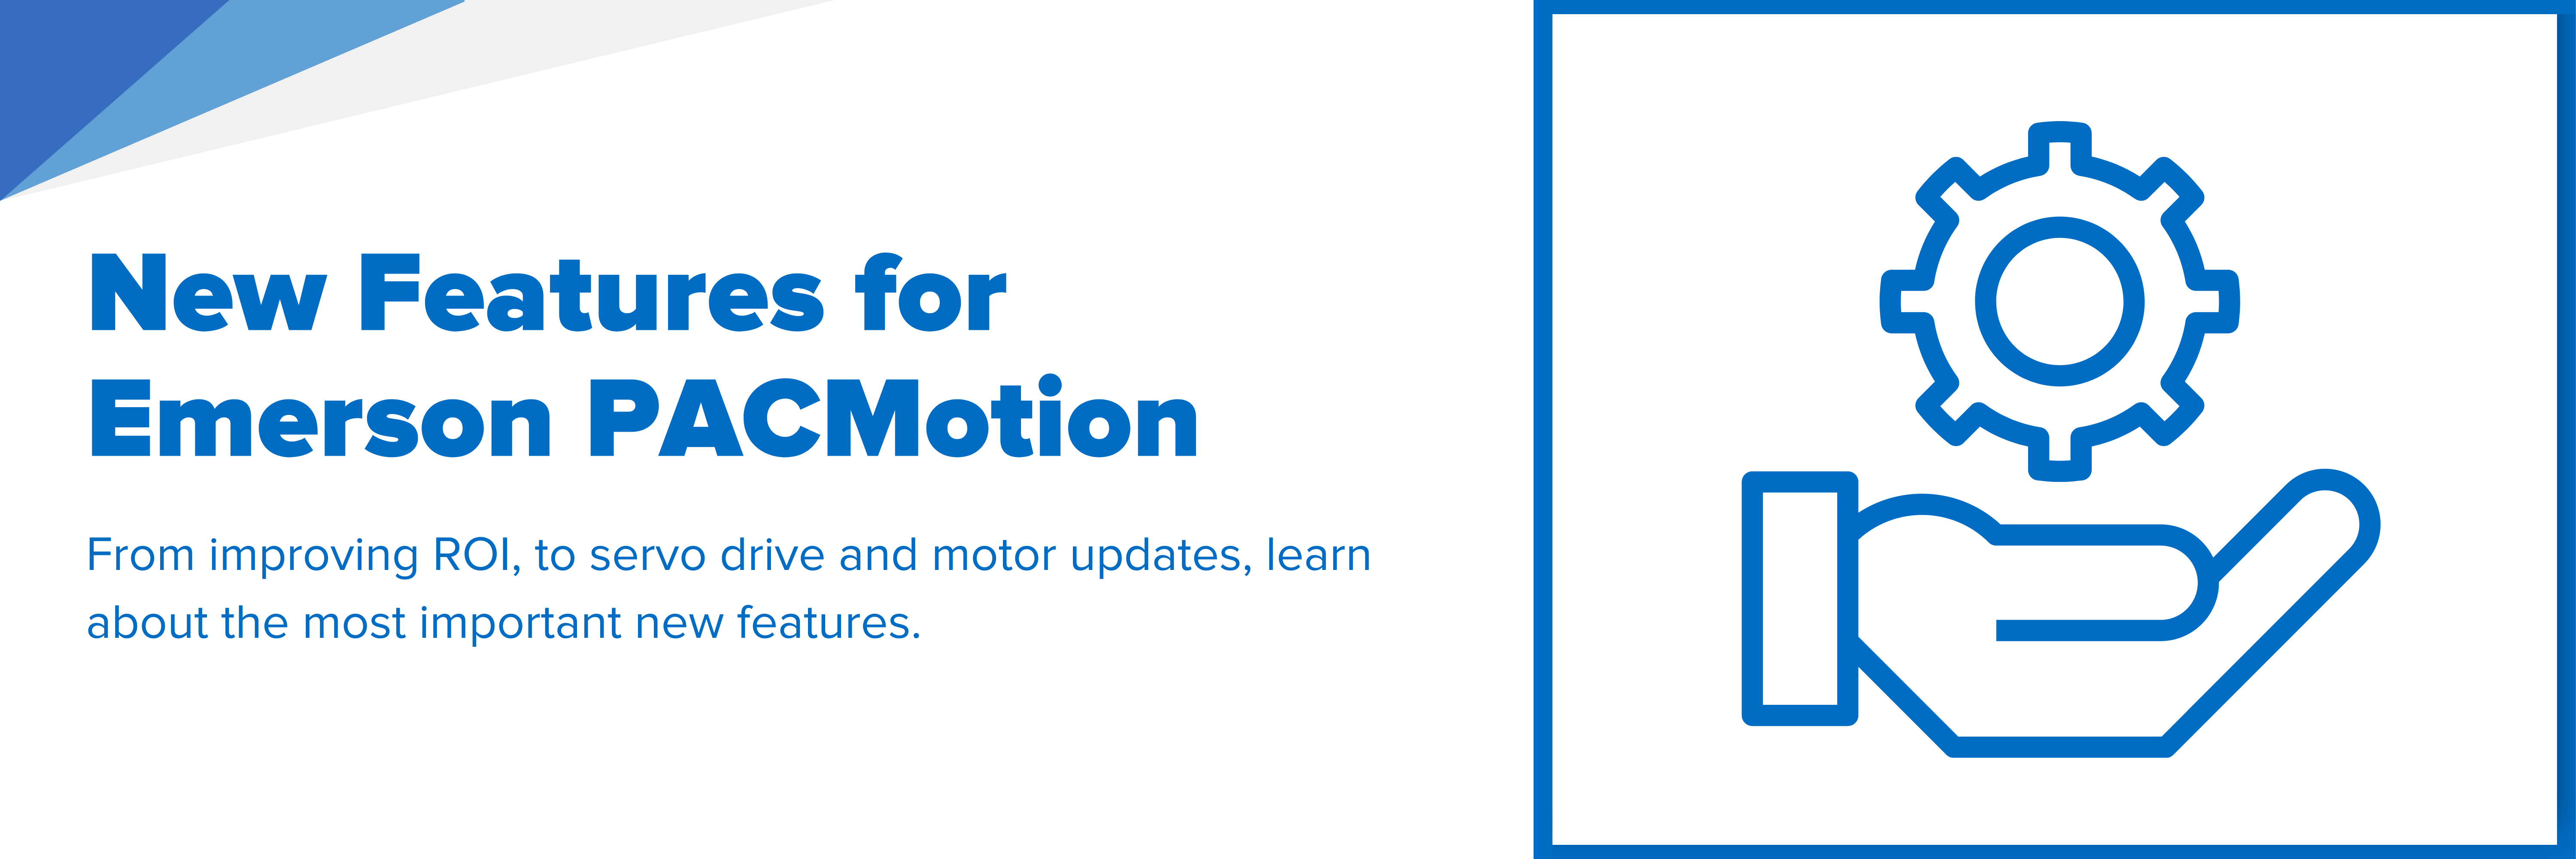 Header image with text "New Features for Emerson PACMotion"